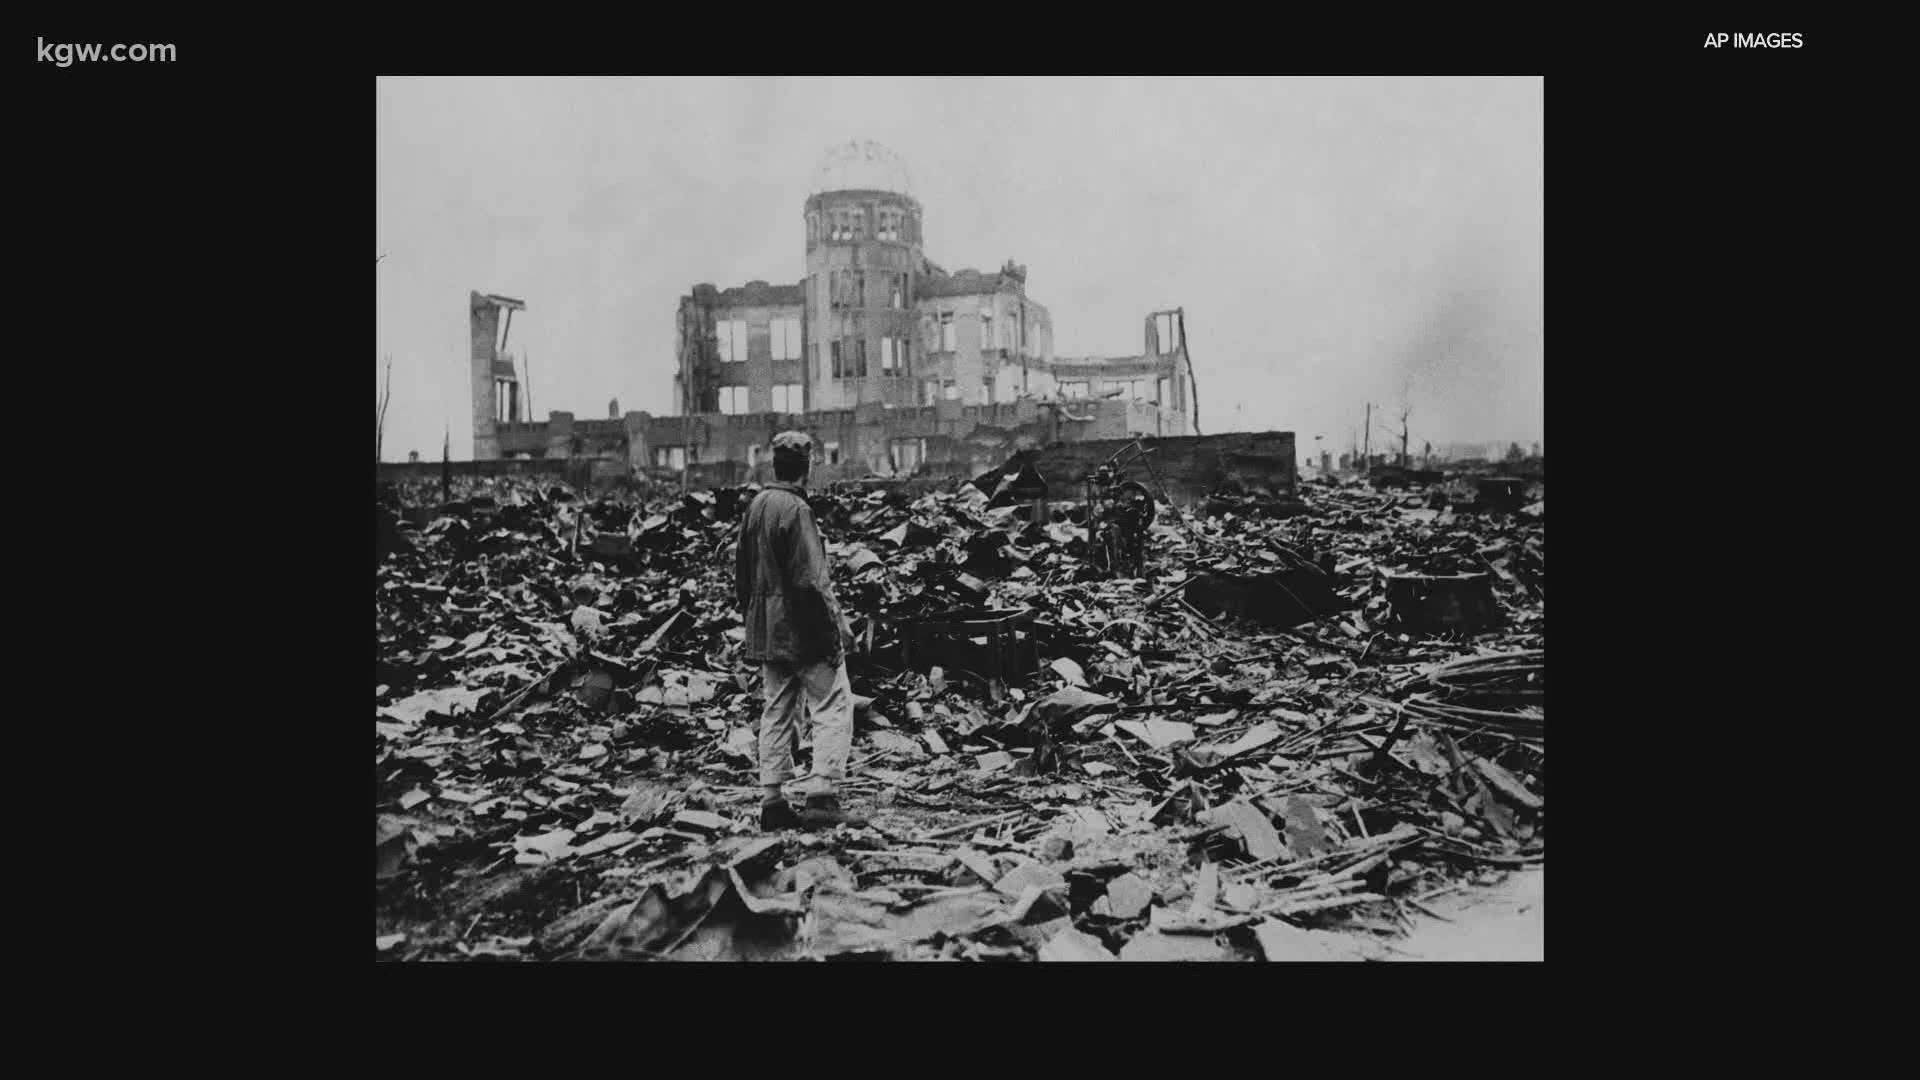 August 6 marks the 75th anniversary of the bombing of Hiroshima in World War II.